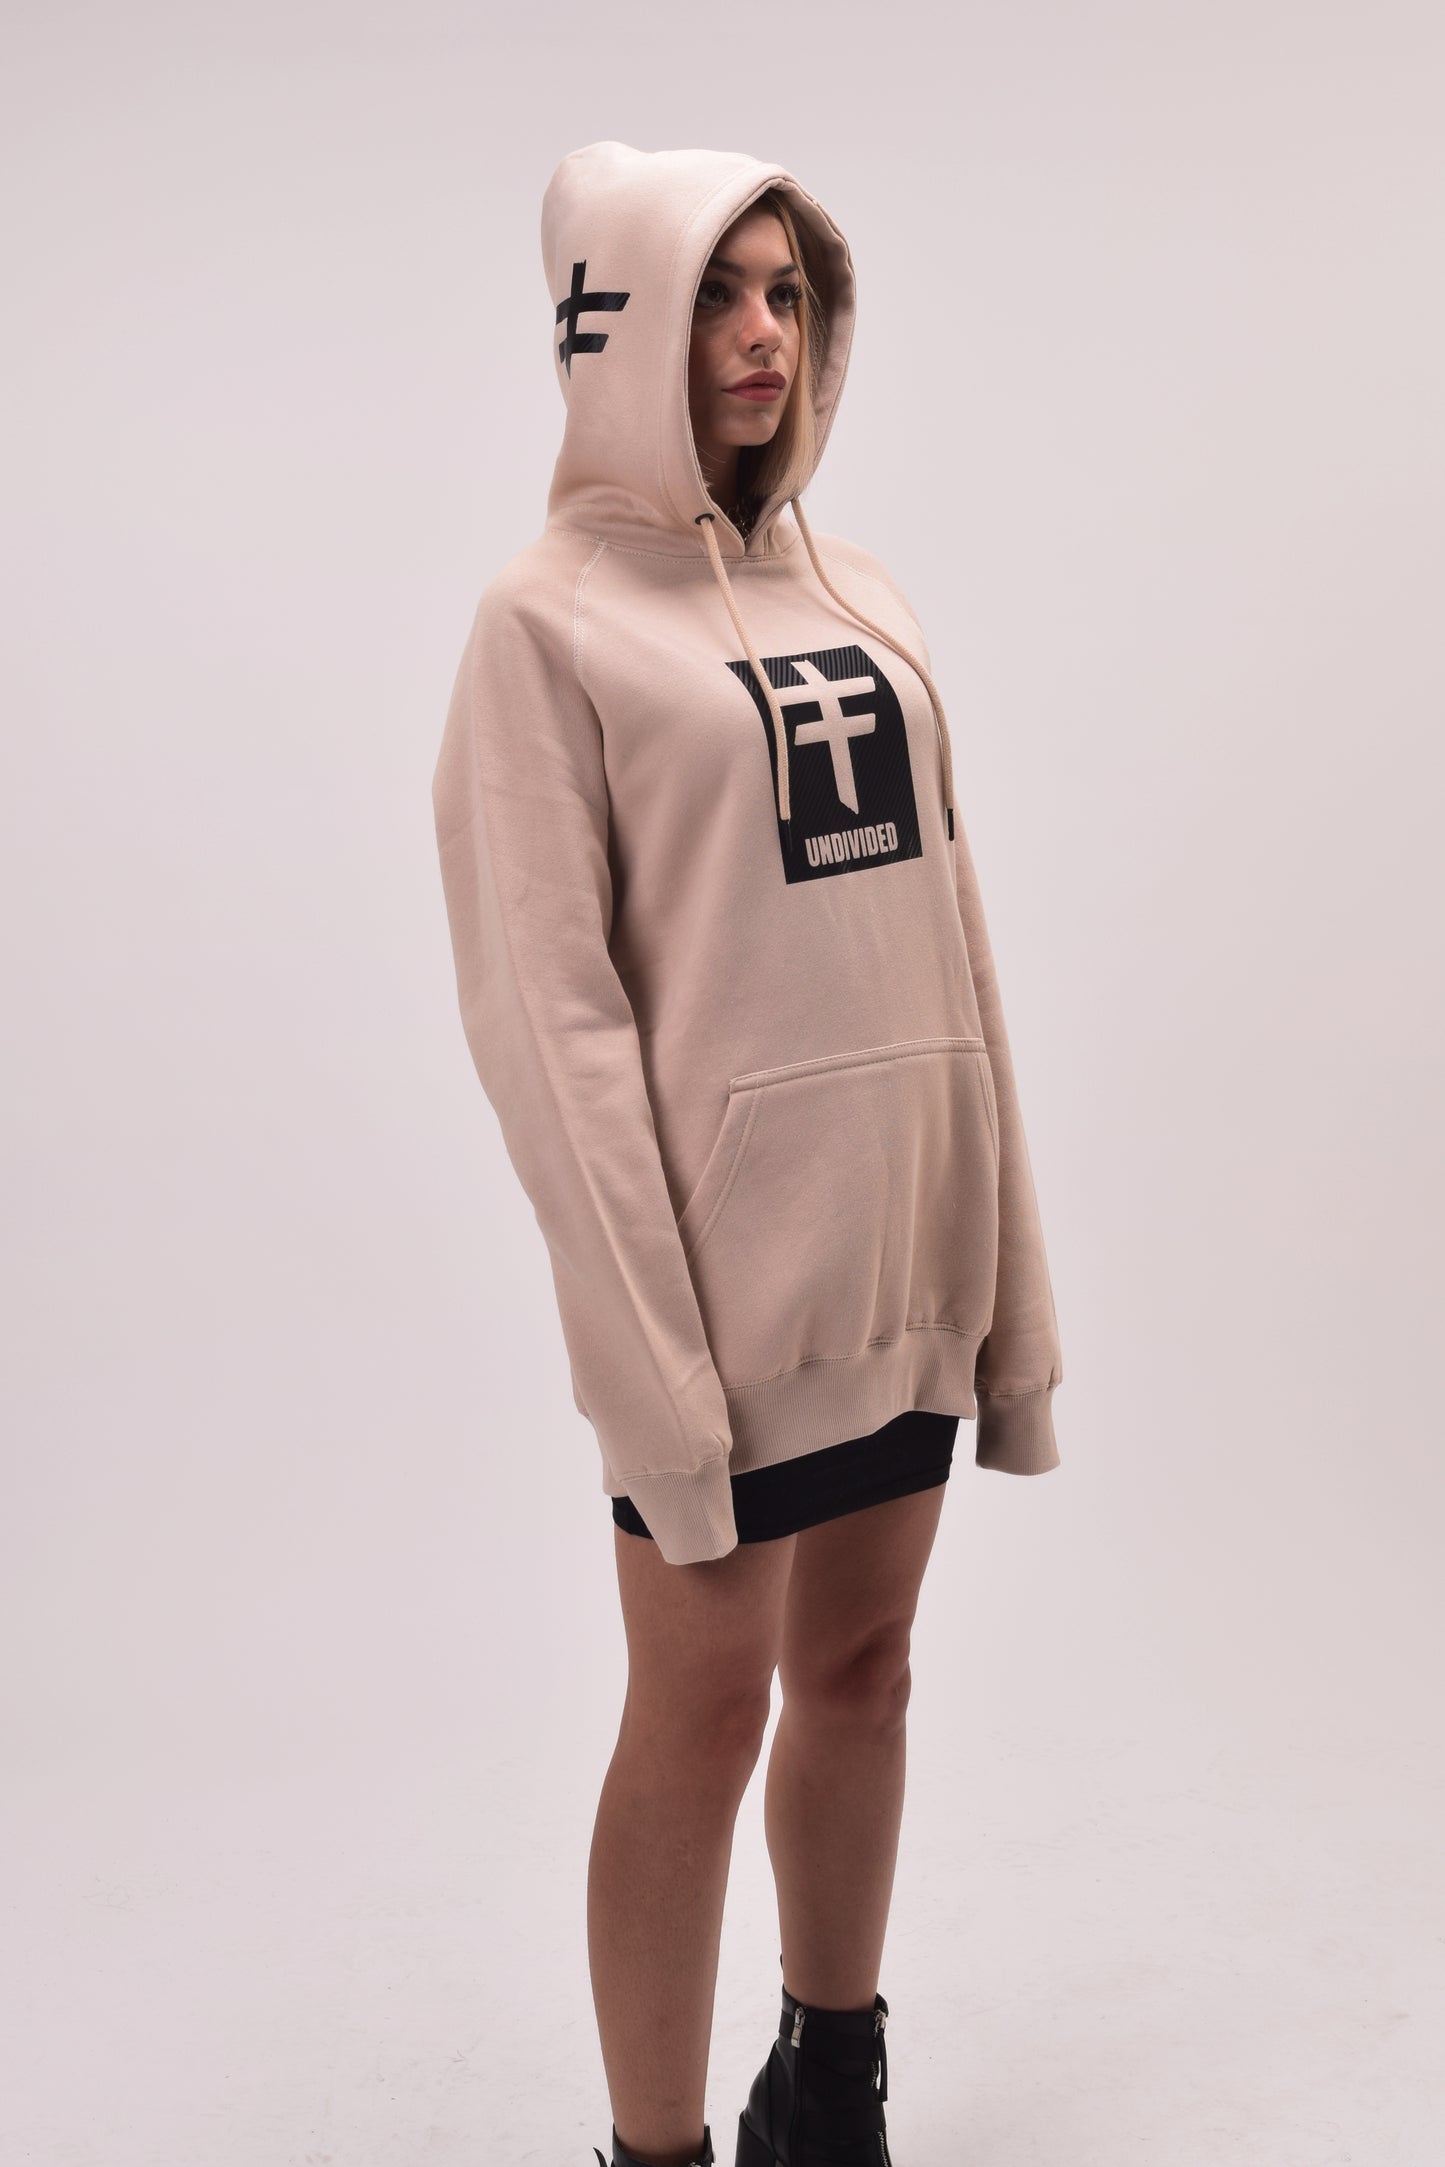 UNDIVIDED Sand Hoodie with Carbon Fibre Print (Unisex)